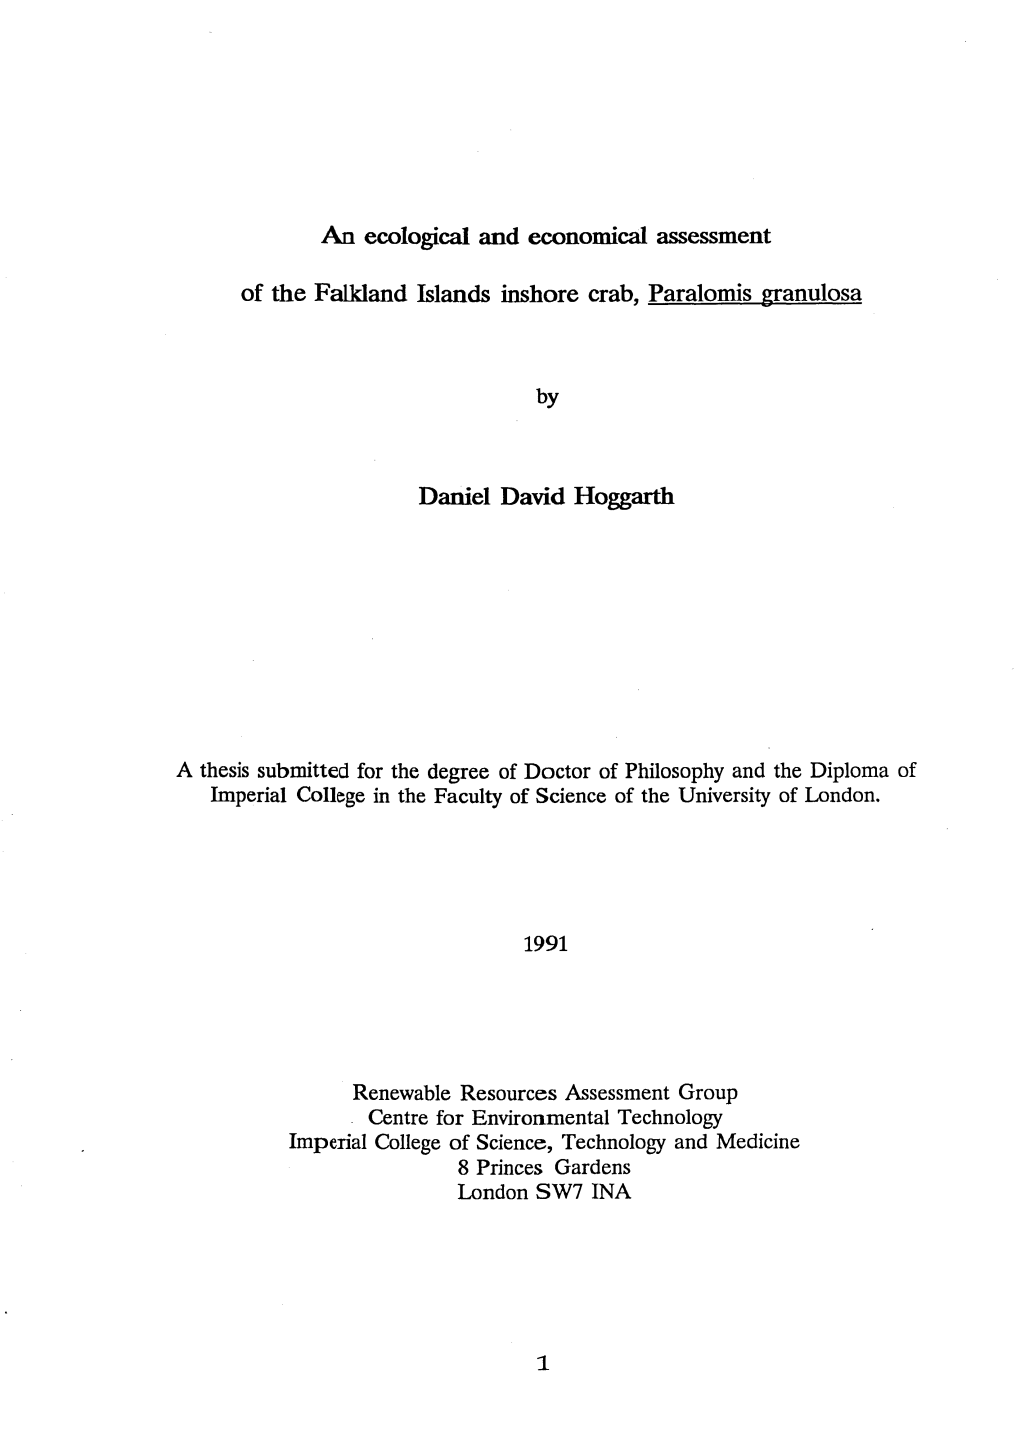 An Ecological and Economical Assessment of the Falkland Islands